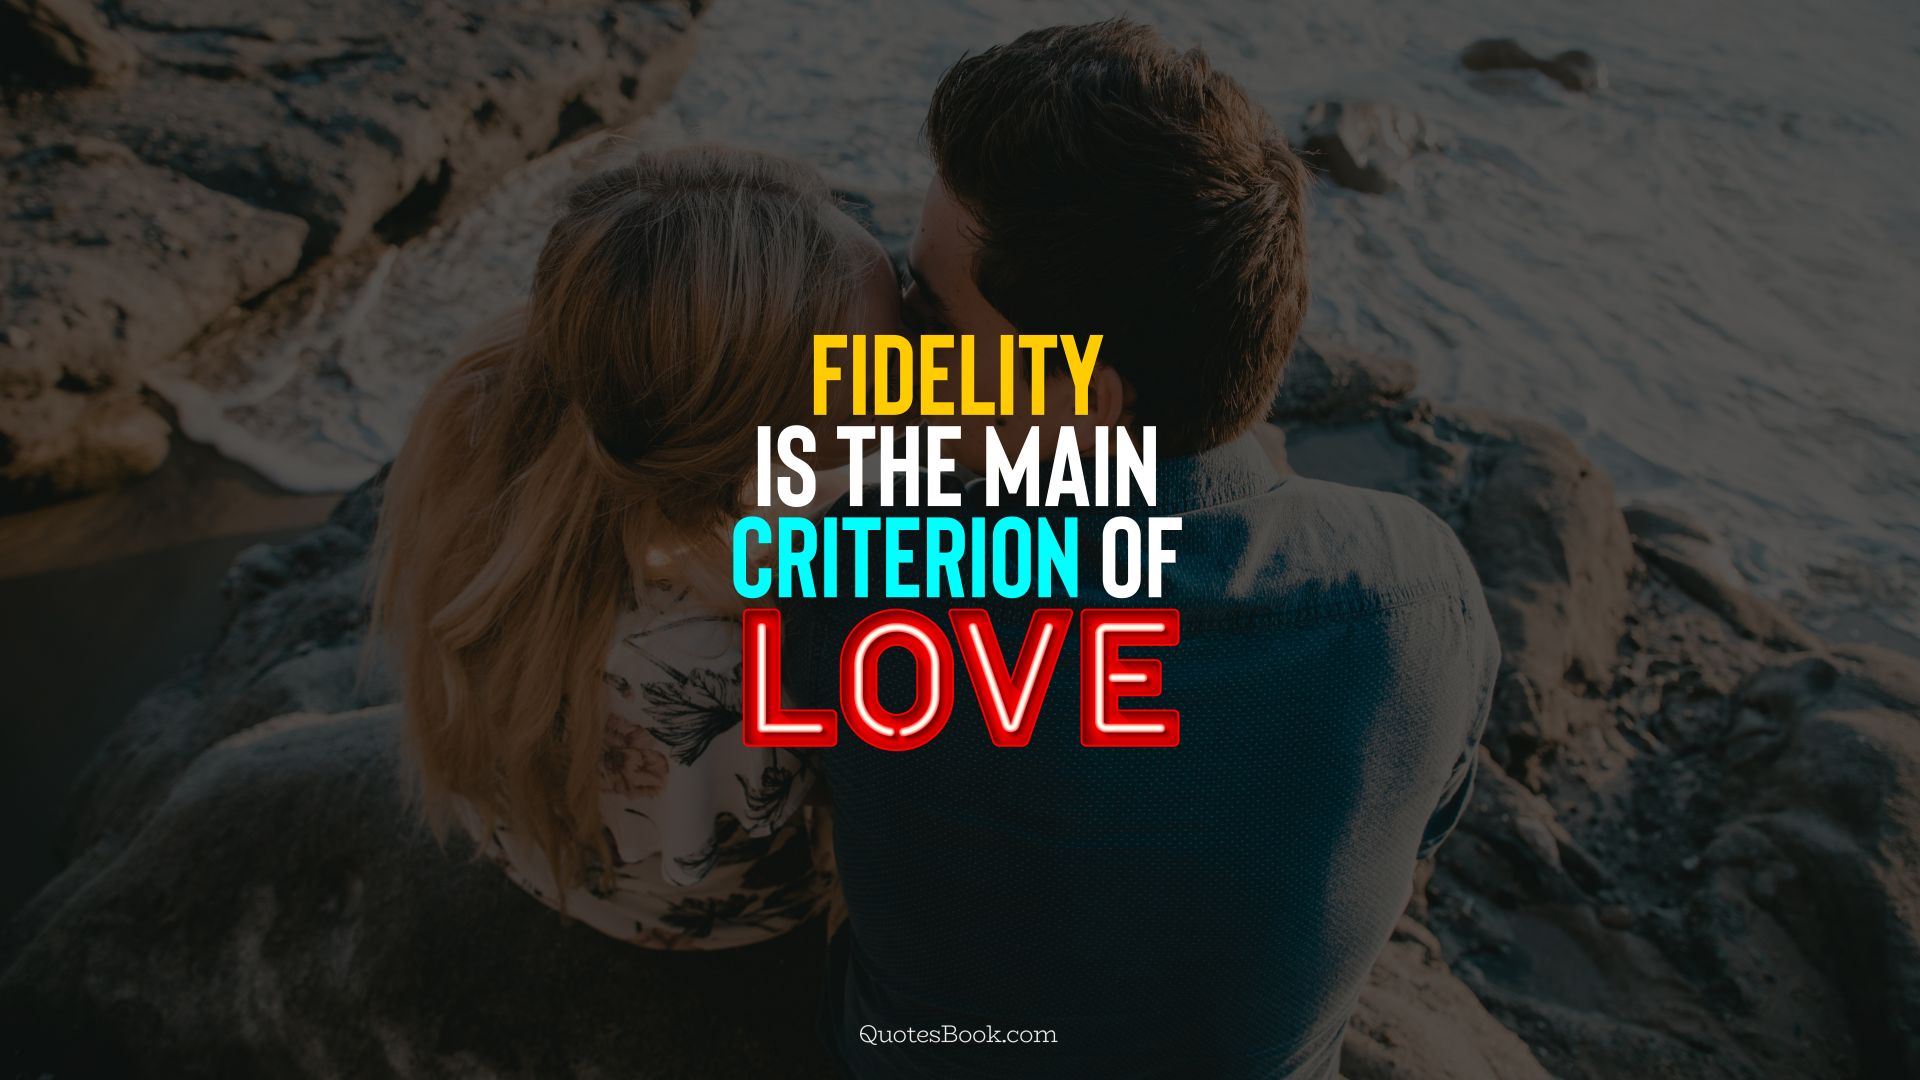 Fidelity is the main criterion of love. - Quote by QuotesBook